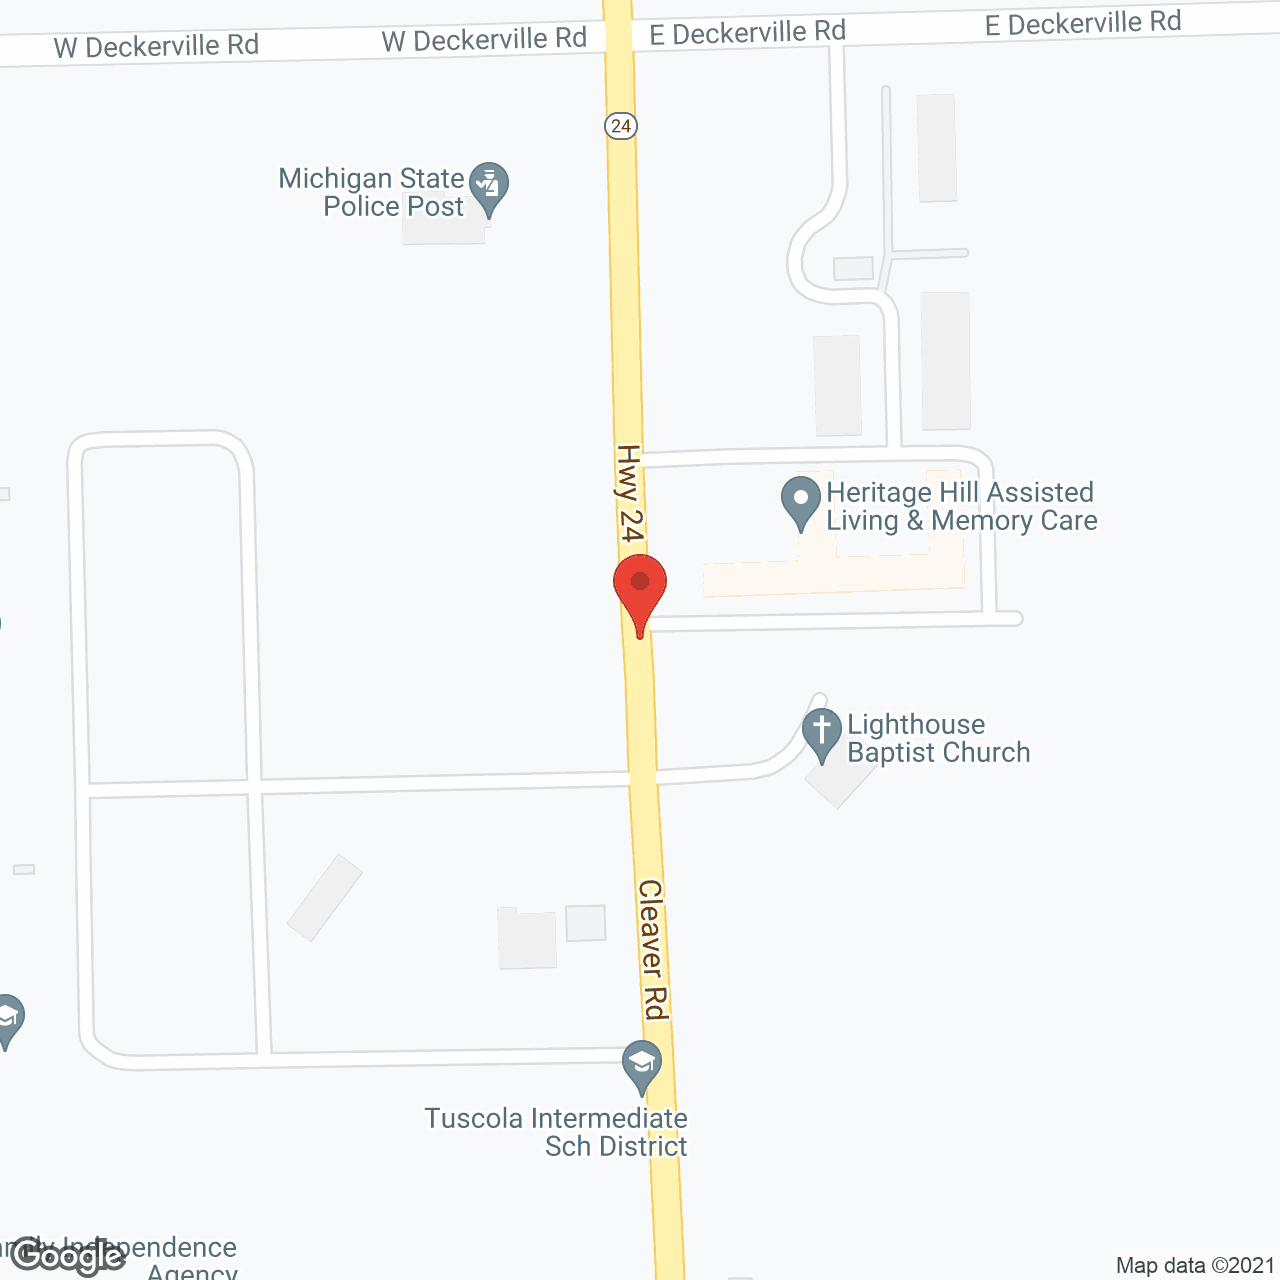 Heritage Hill Assisted Living and Memory Care in google map